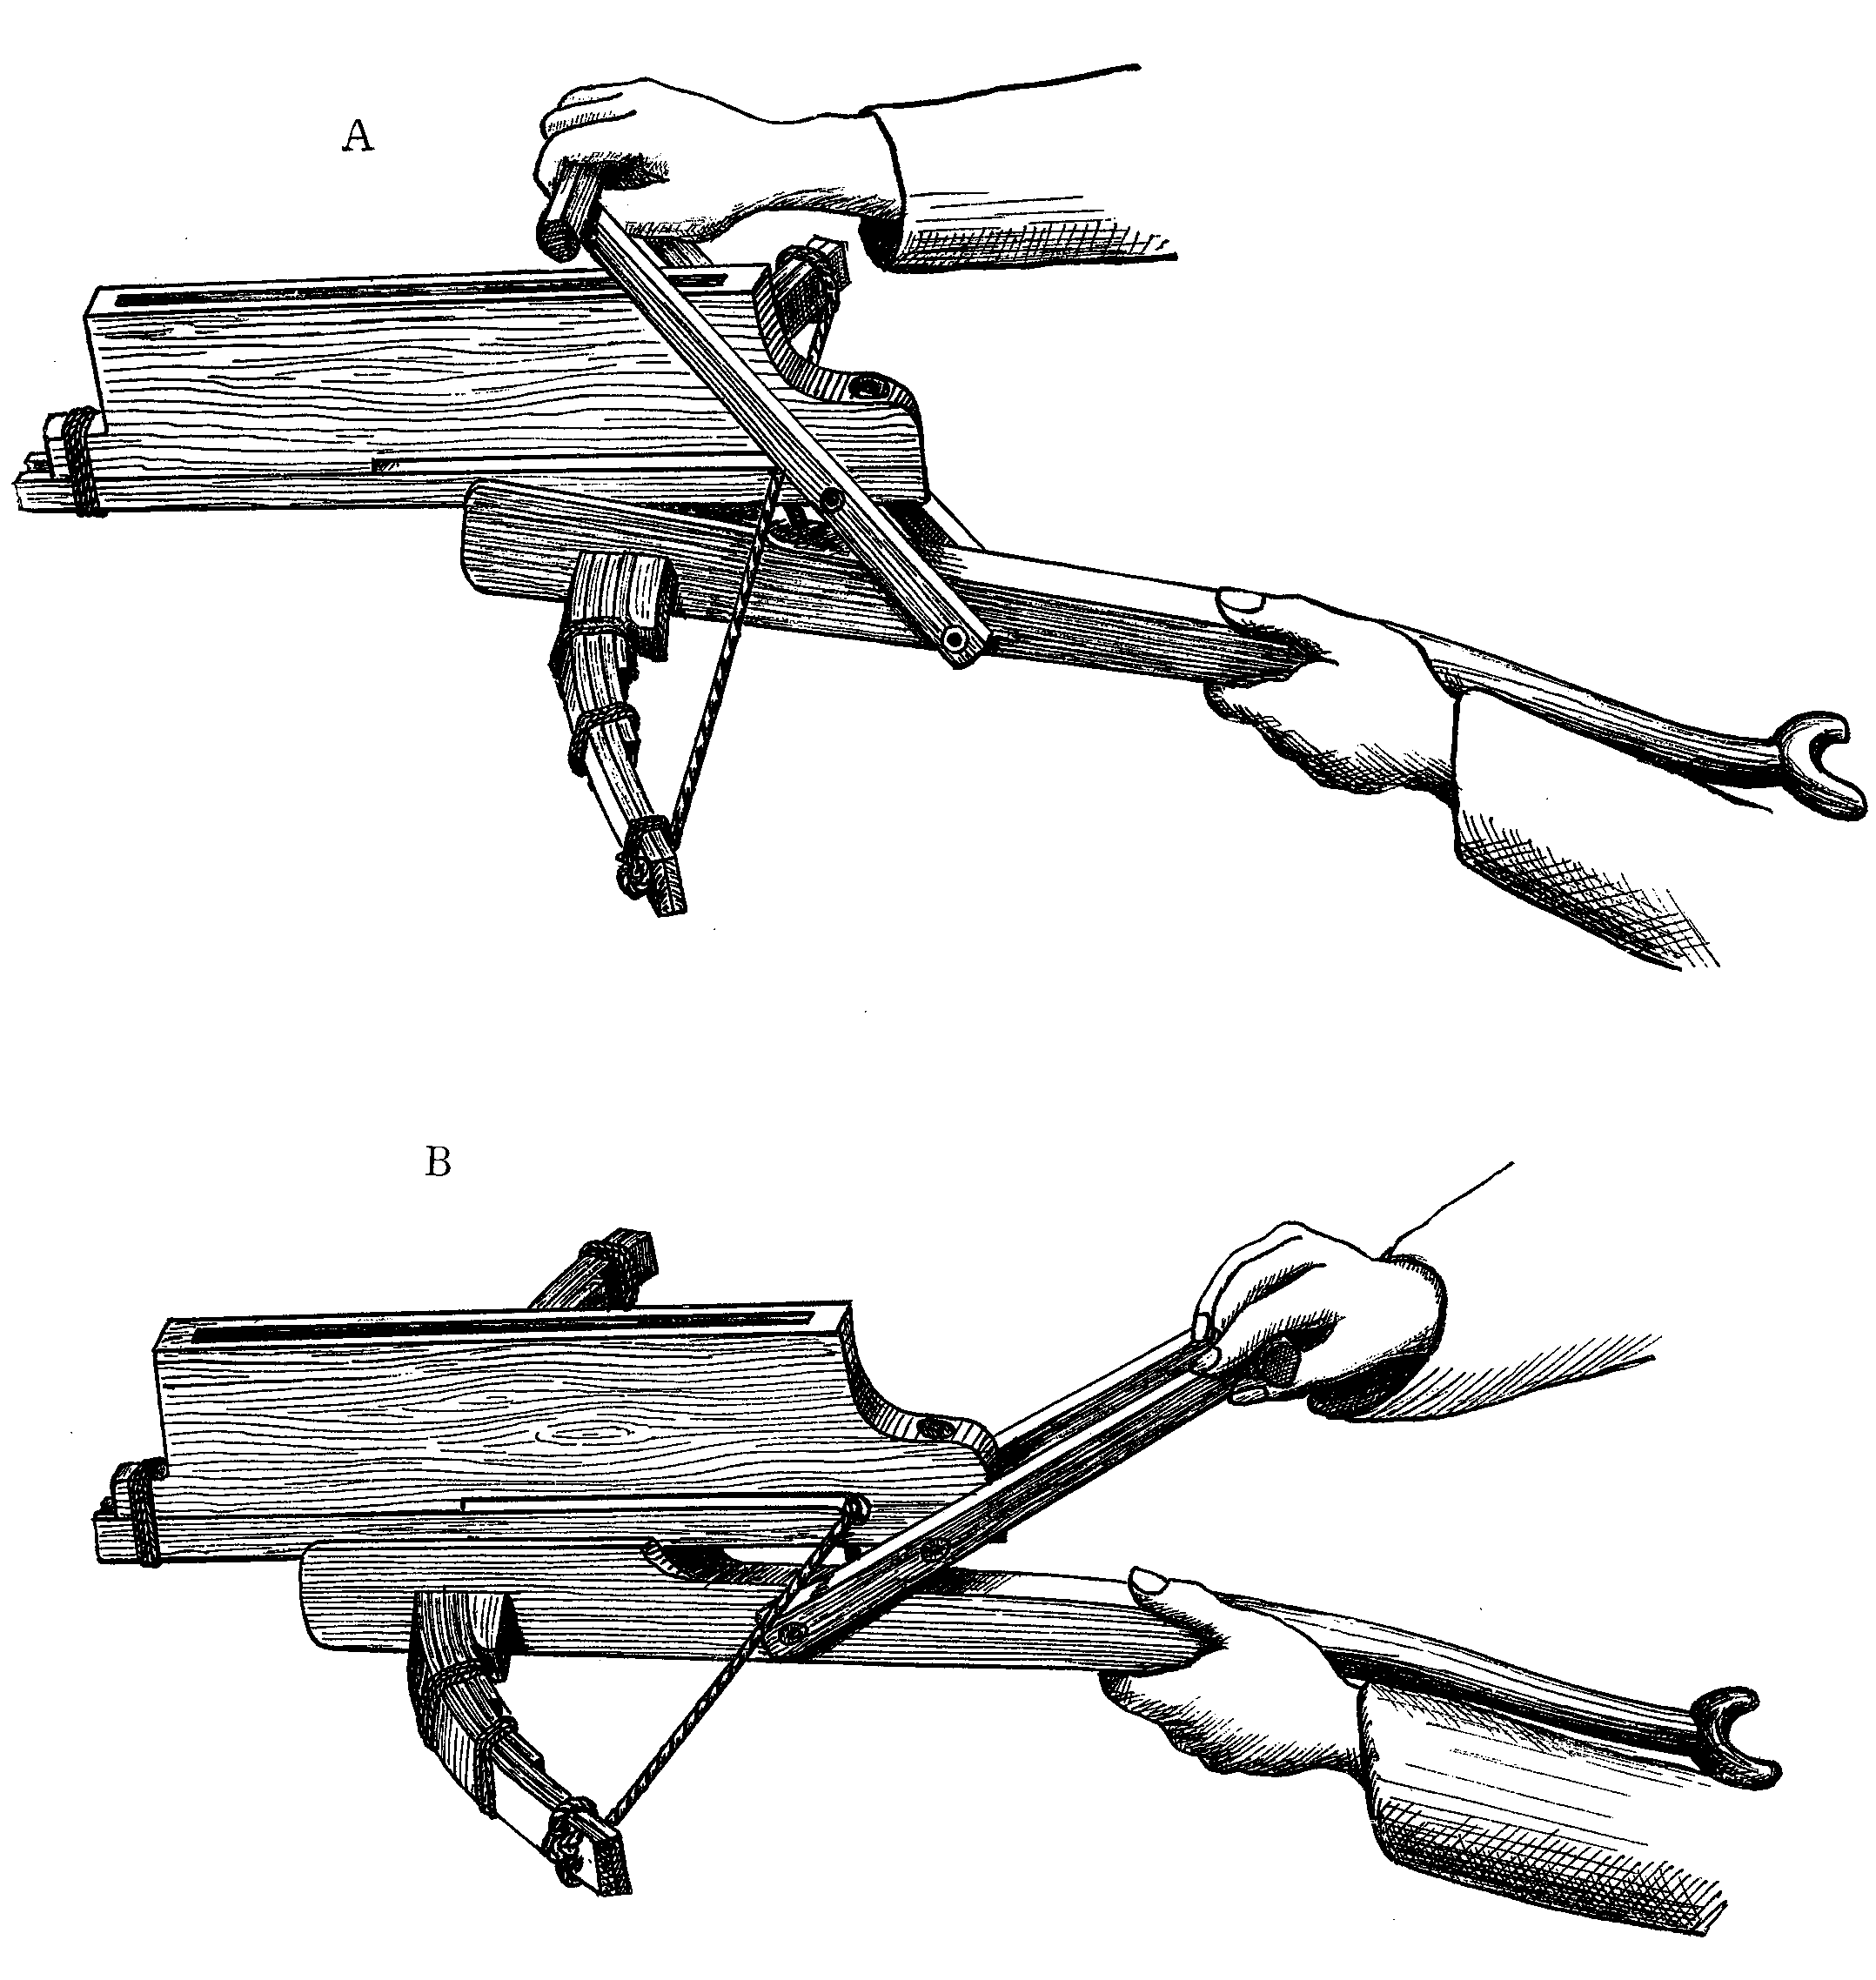 repeating crossbows